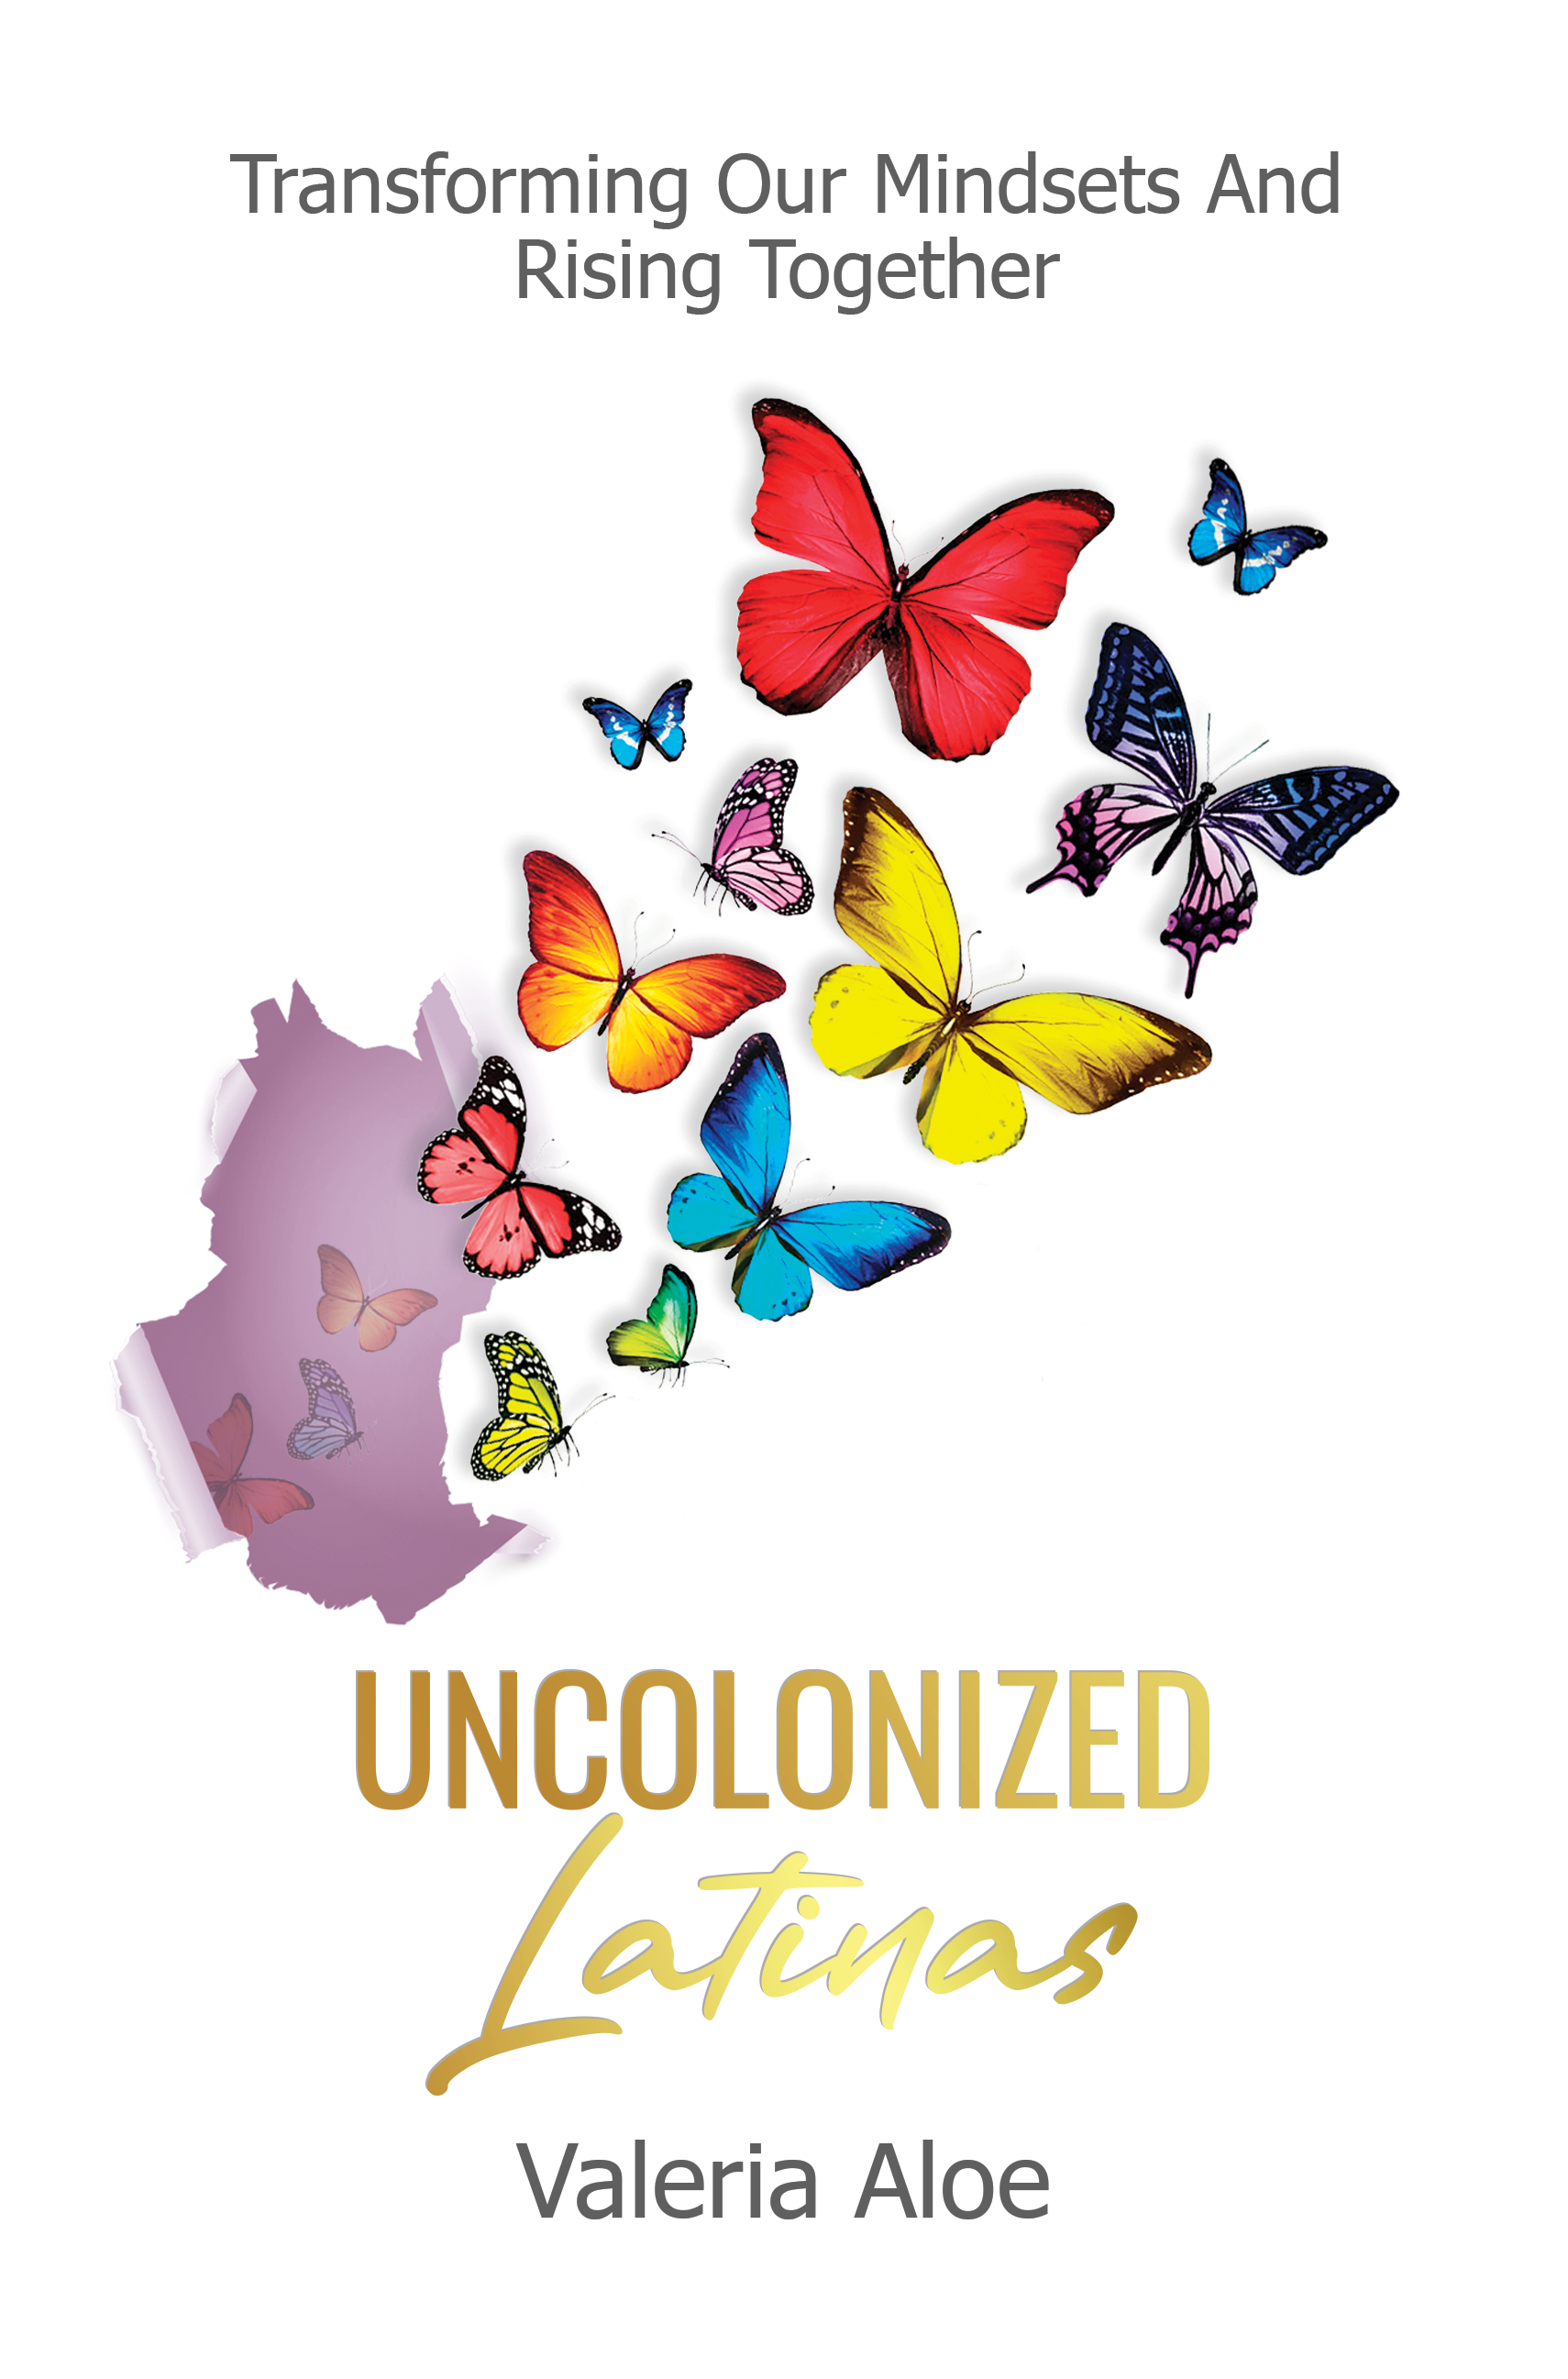 colorful butterflies representing the diversity of Hispanics, breaking through the book cover (representing breaking through limiting cultural beliefs)